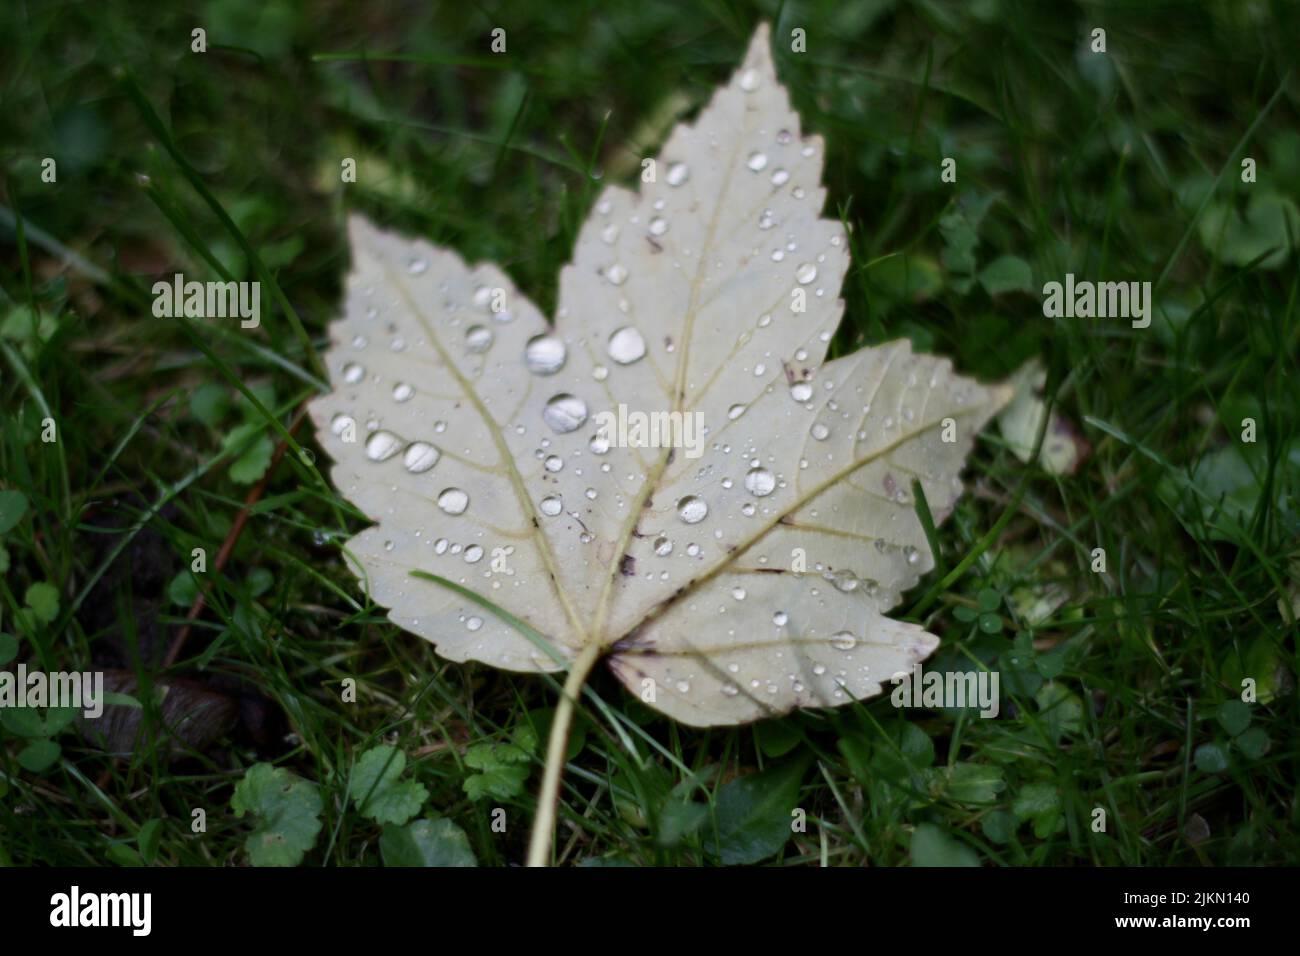 A closeup of a leaf in waterdrops on the grass Stock Photo